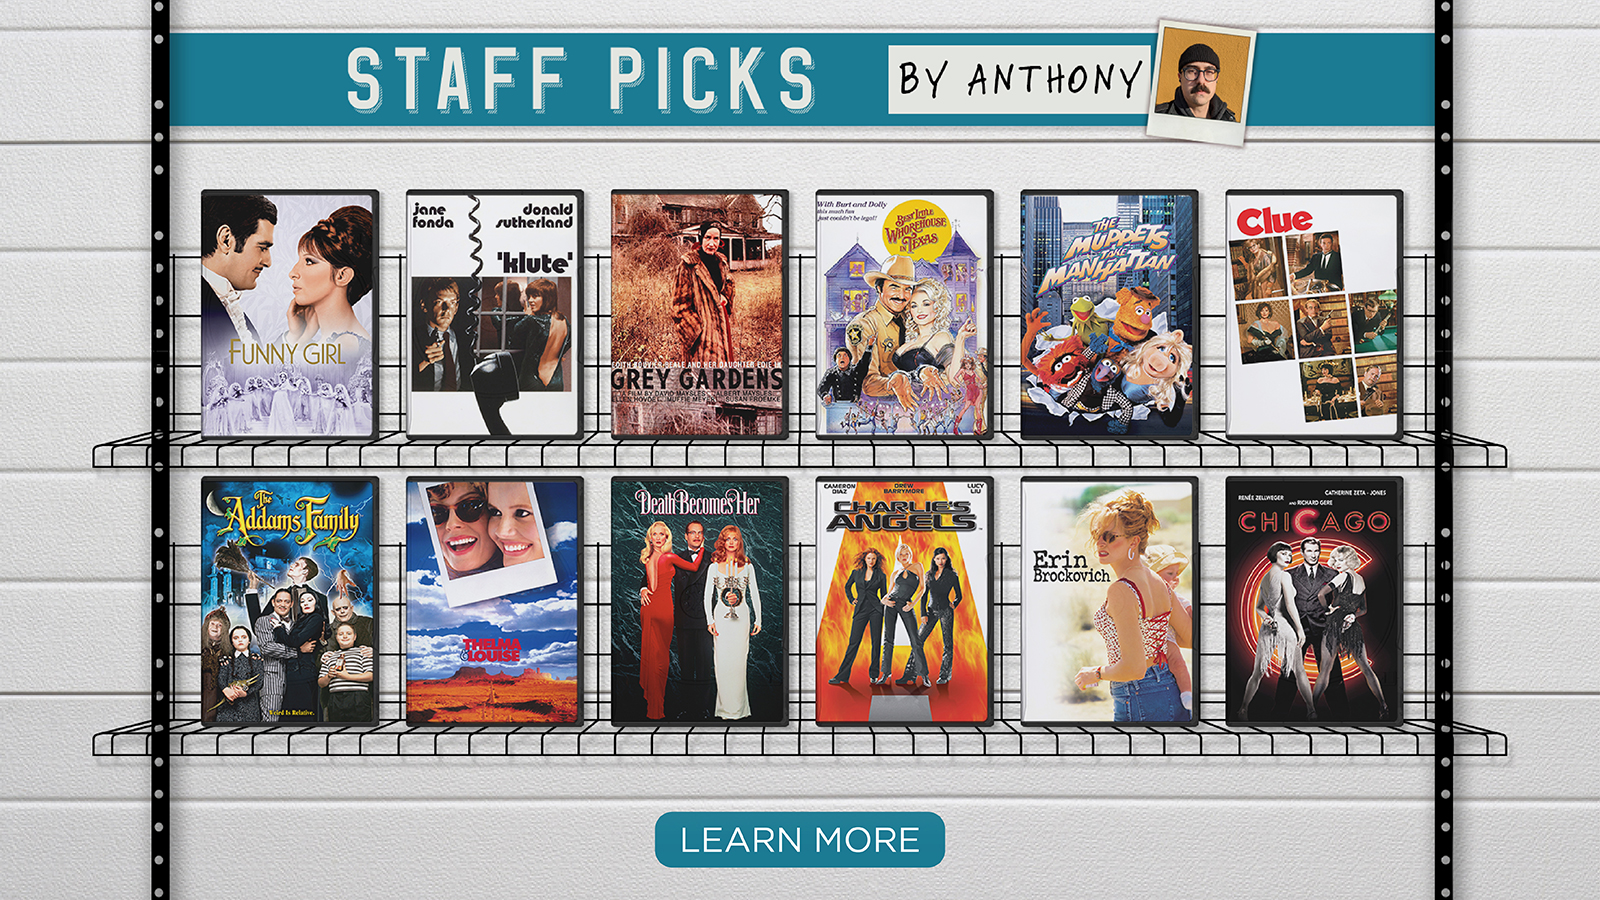 Staff Picks by Anthony - Learn More